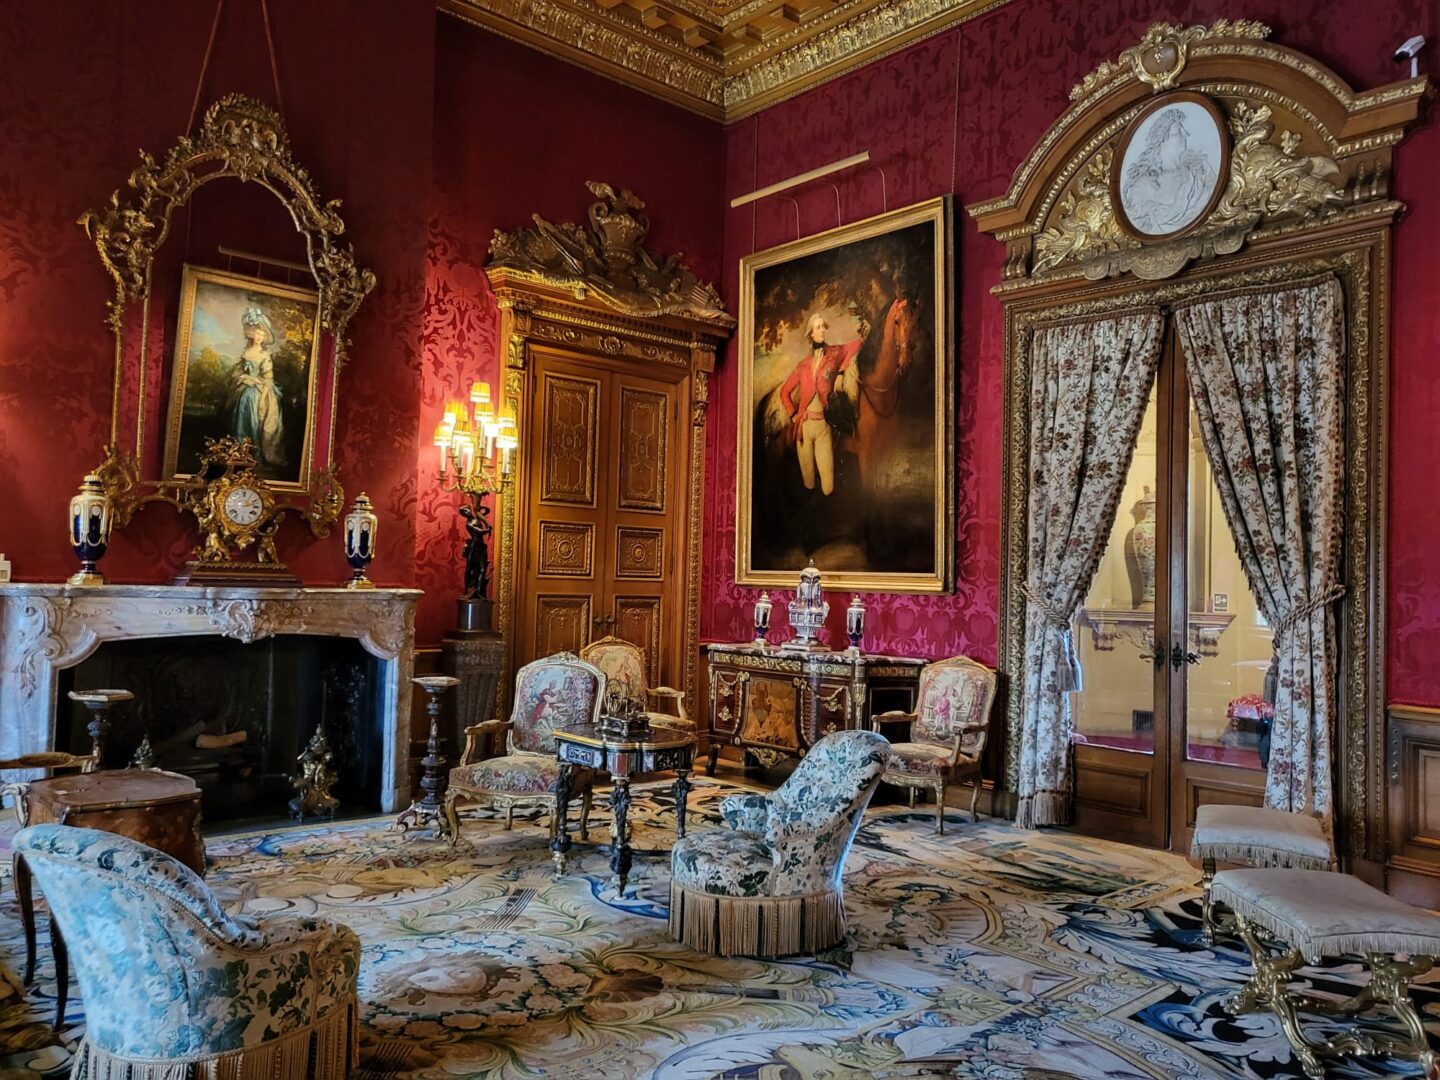 Exploring Waddesdon Manor - The Red Drawing Room